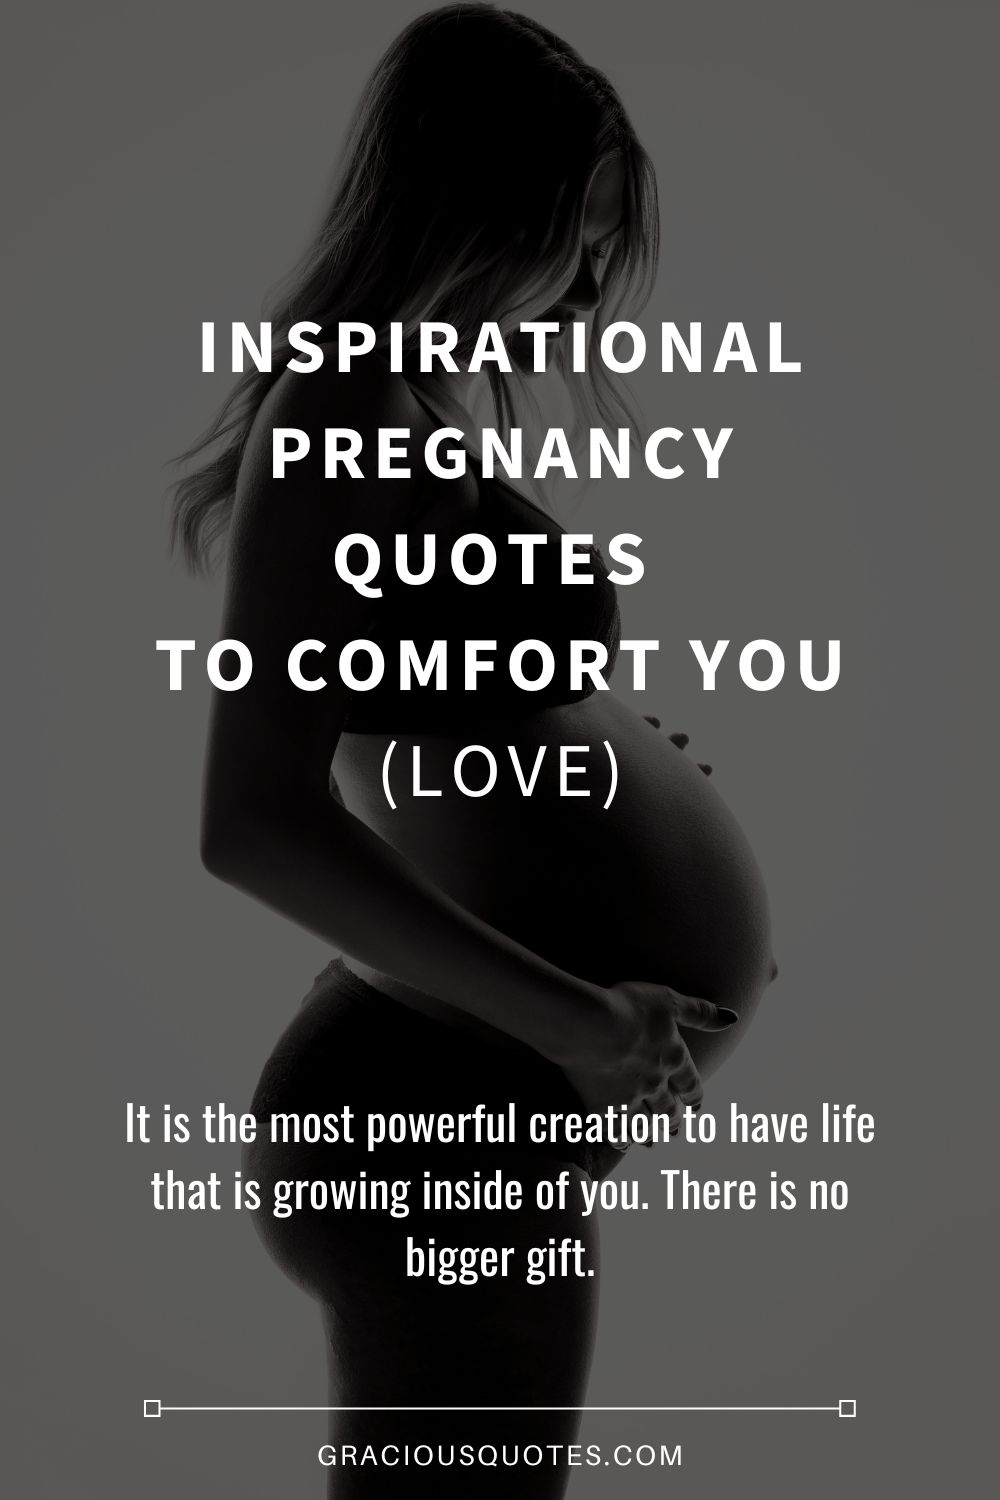 https://graciousquotes.com/wp-content/uploads/2022/12/Inspirational-Pregnancy-Quotes-to-Comfort-You-LOVE-Gracious-Quotes.jpg